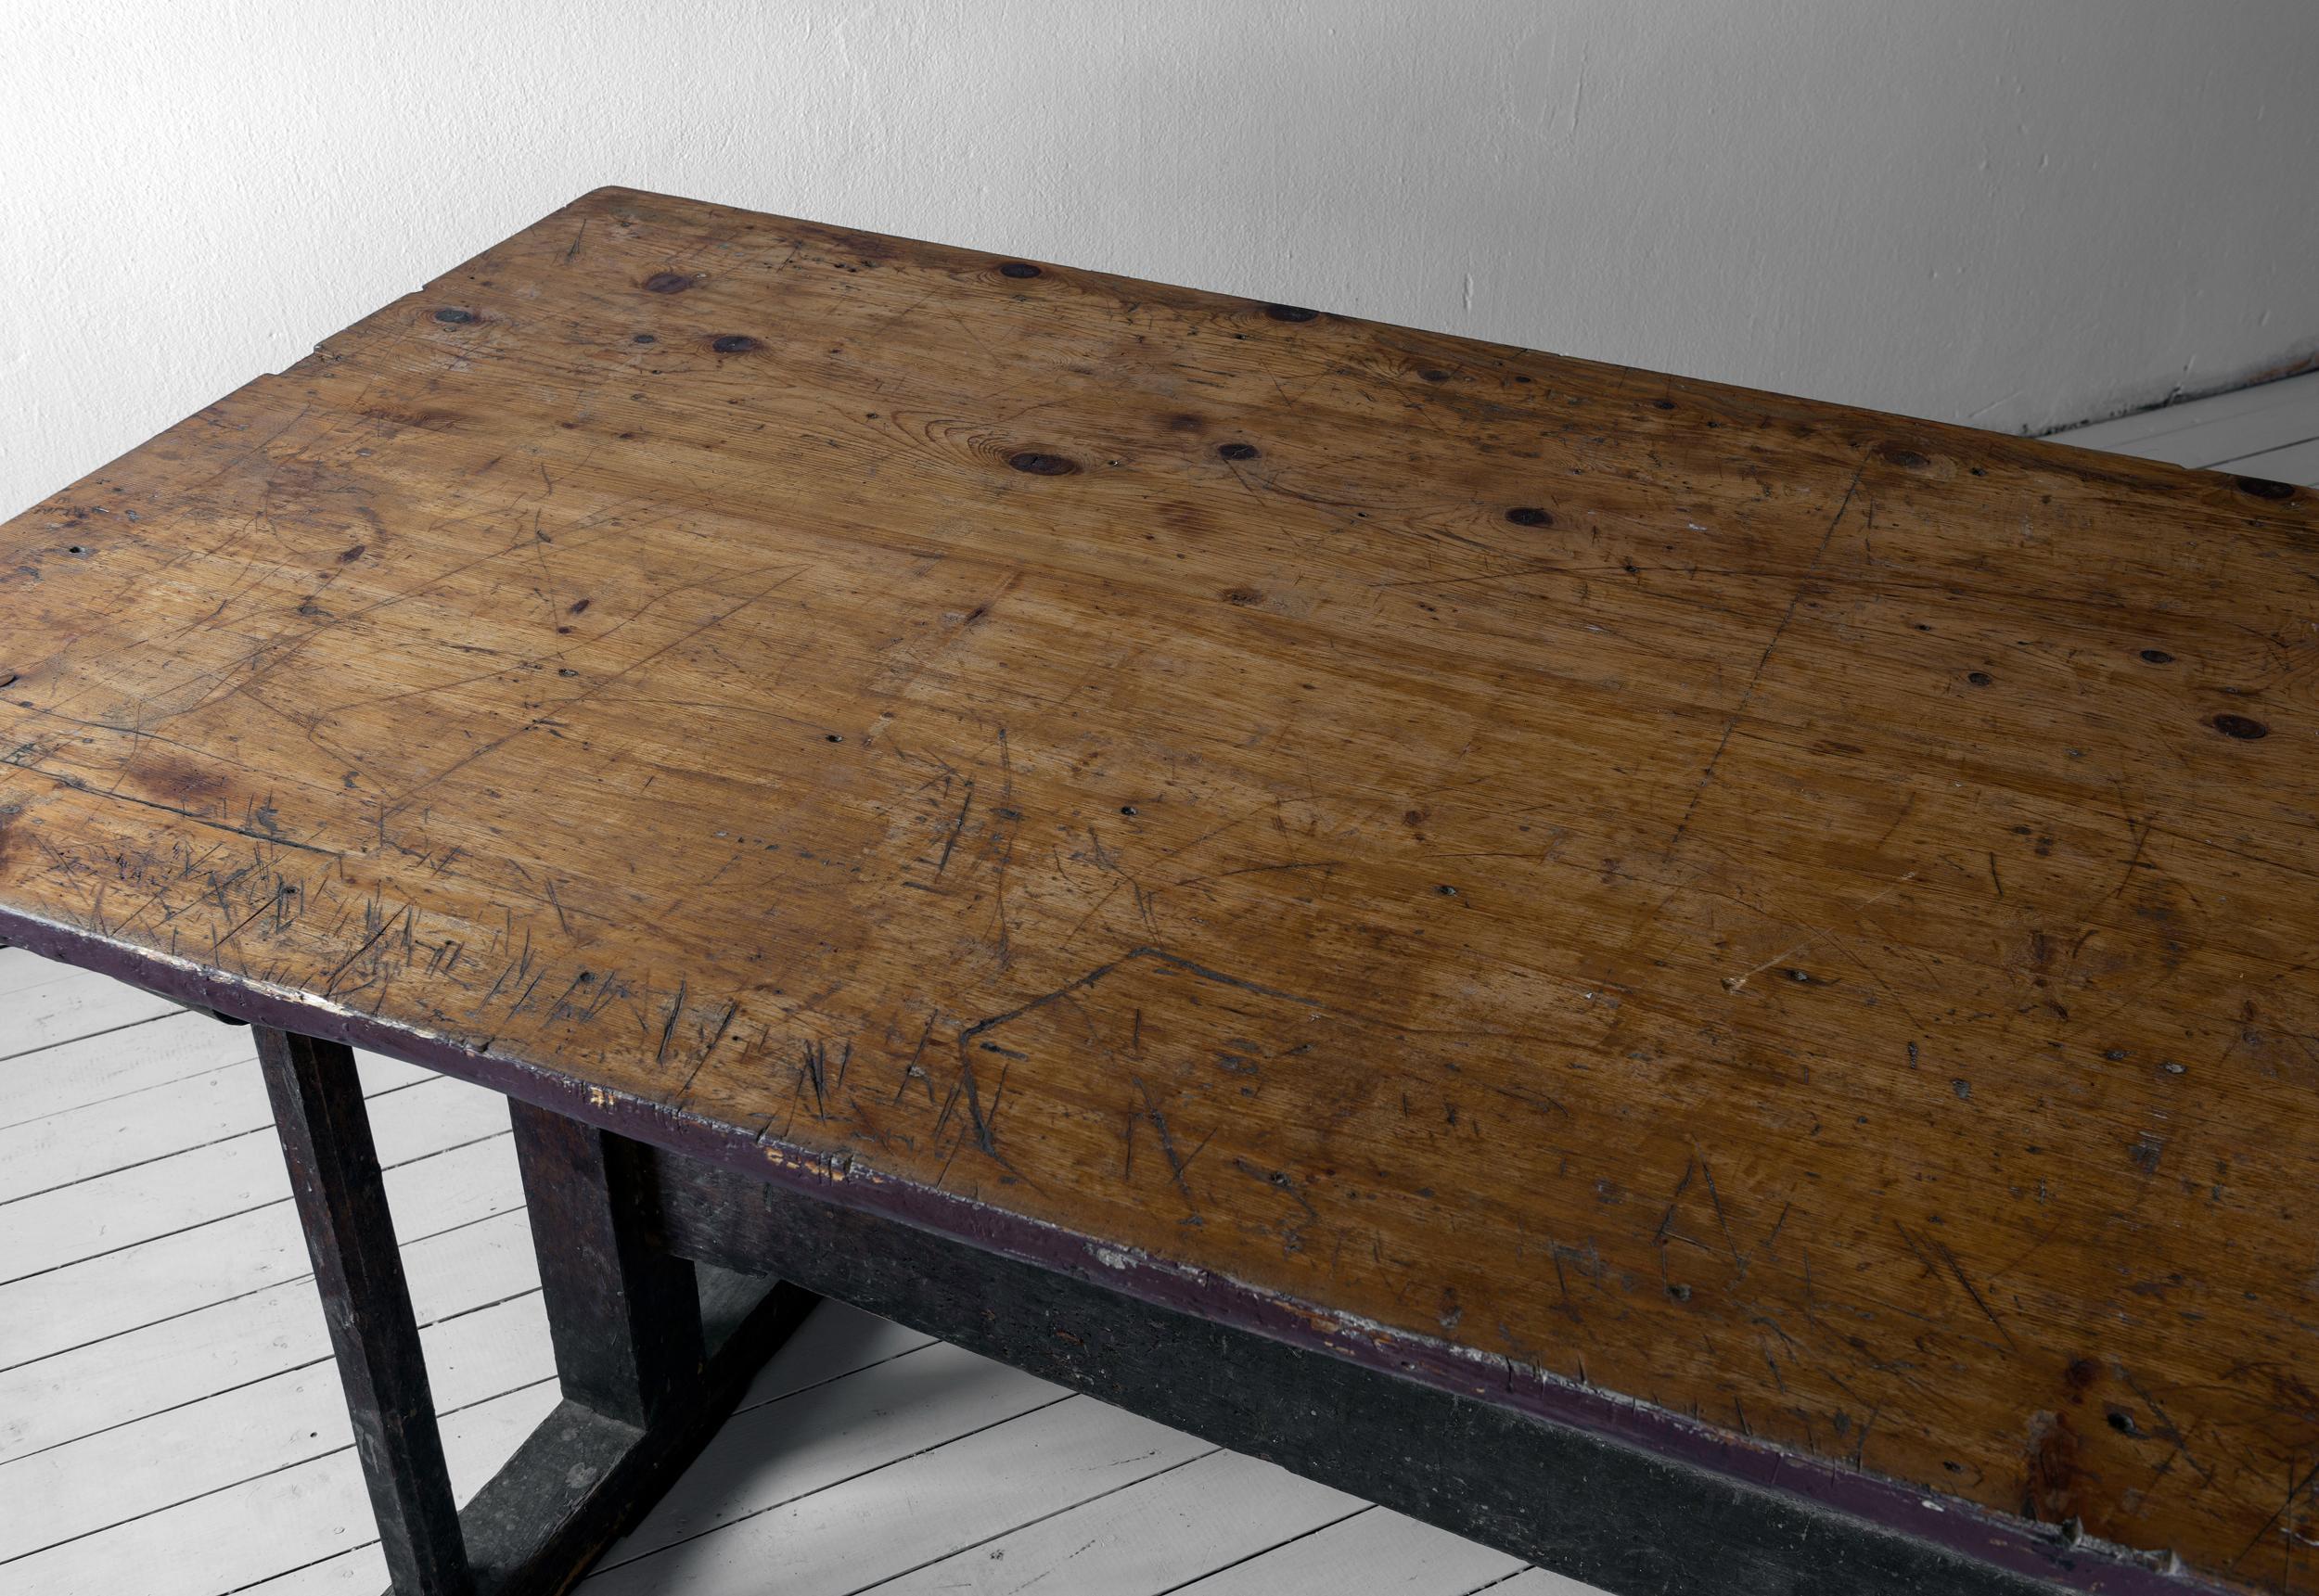 19th Century Minimal Wabi Sabi Dining Table or Desk with Remains of Original Paint